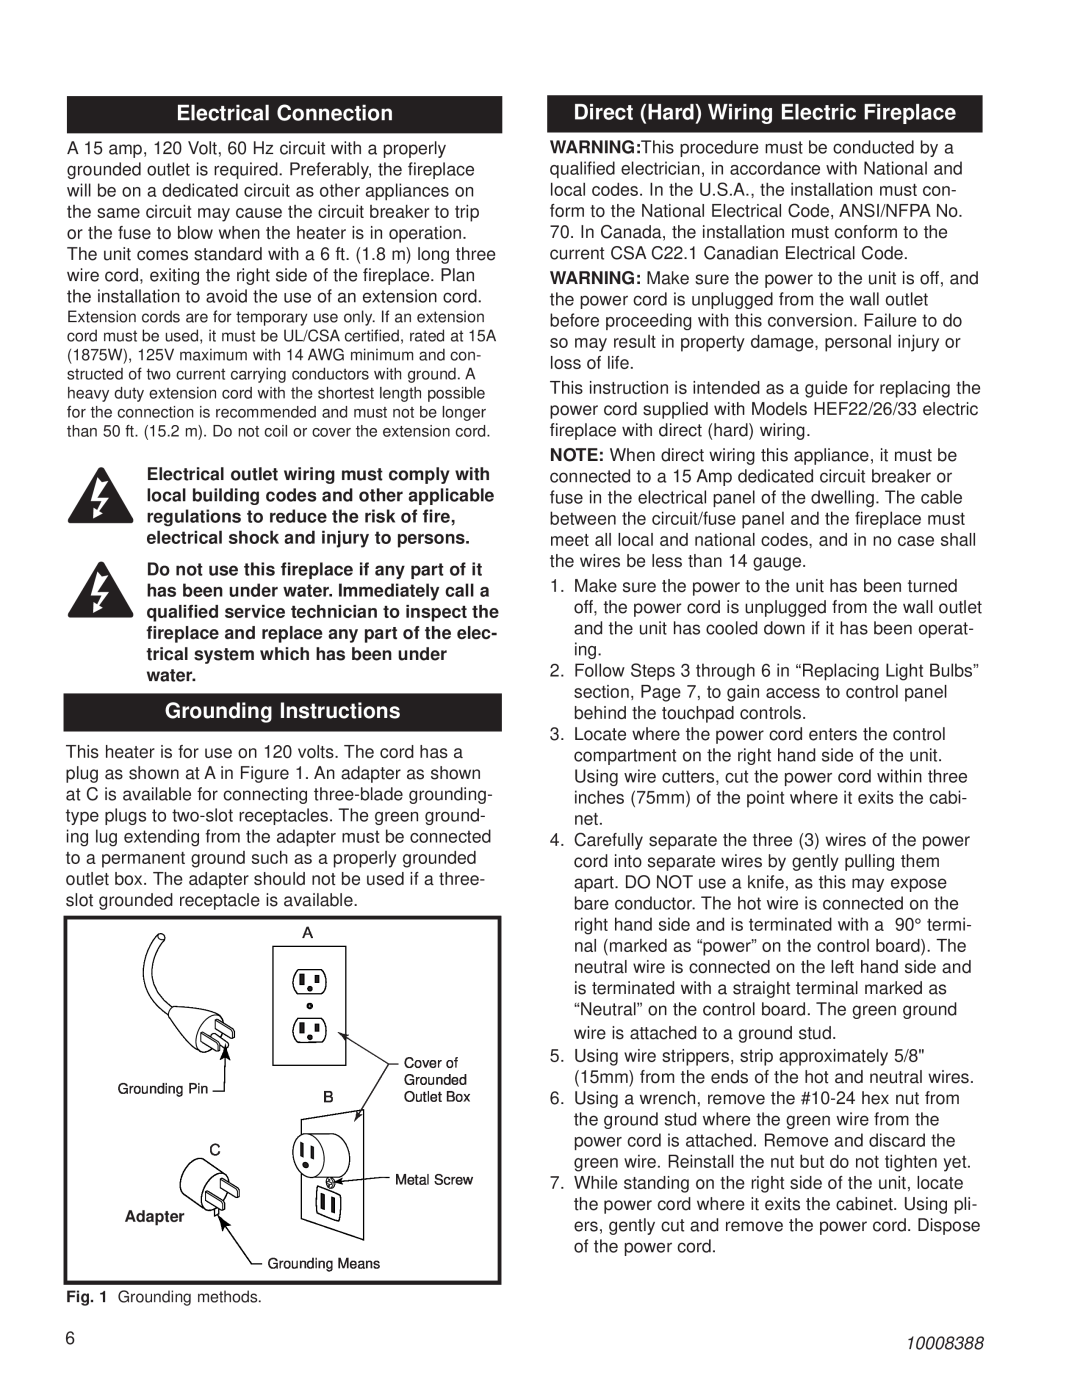 CFM Corporation HEF33 Electrical Connection, Grounding Instructions, Direct Hard Wiring Electric Fireplace, 10008388 